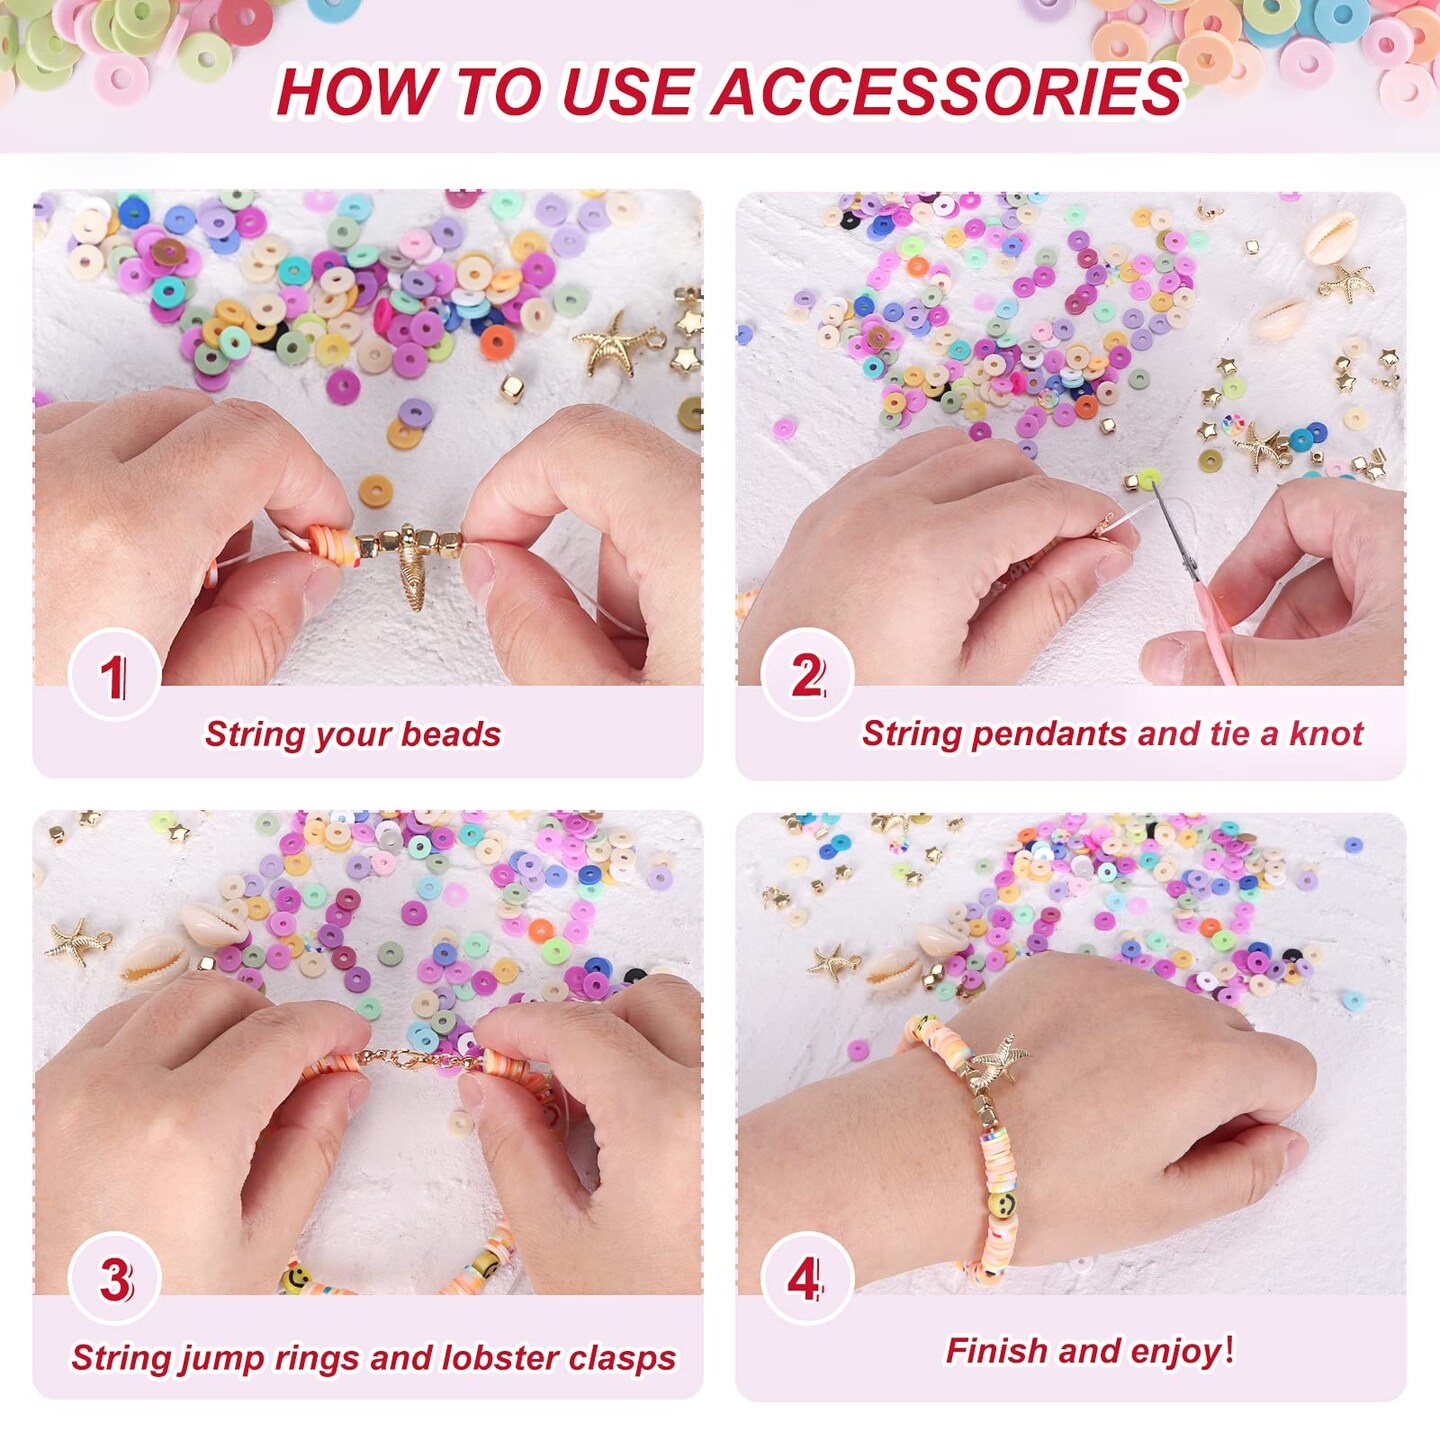 Girls DIY Bracelet Making Kit Colored String Beads Kit For Friendship  Necklace Making Art Jewelry Kids Toys for 6-12 Years Old Birthday  Children's day gift 